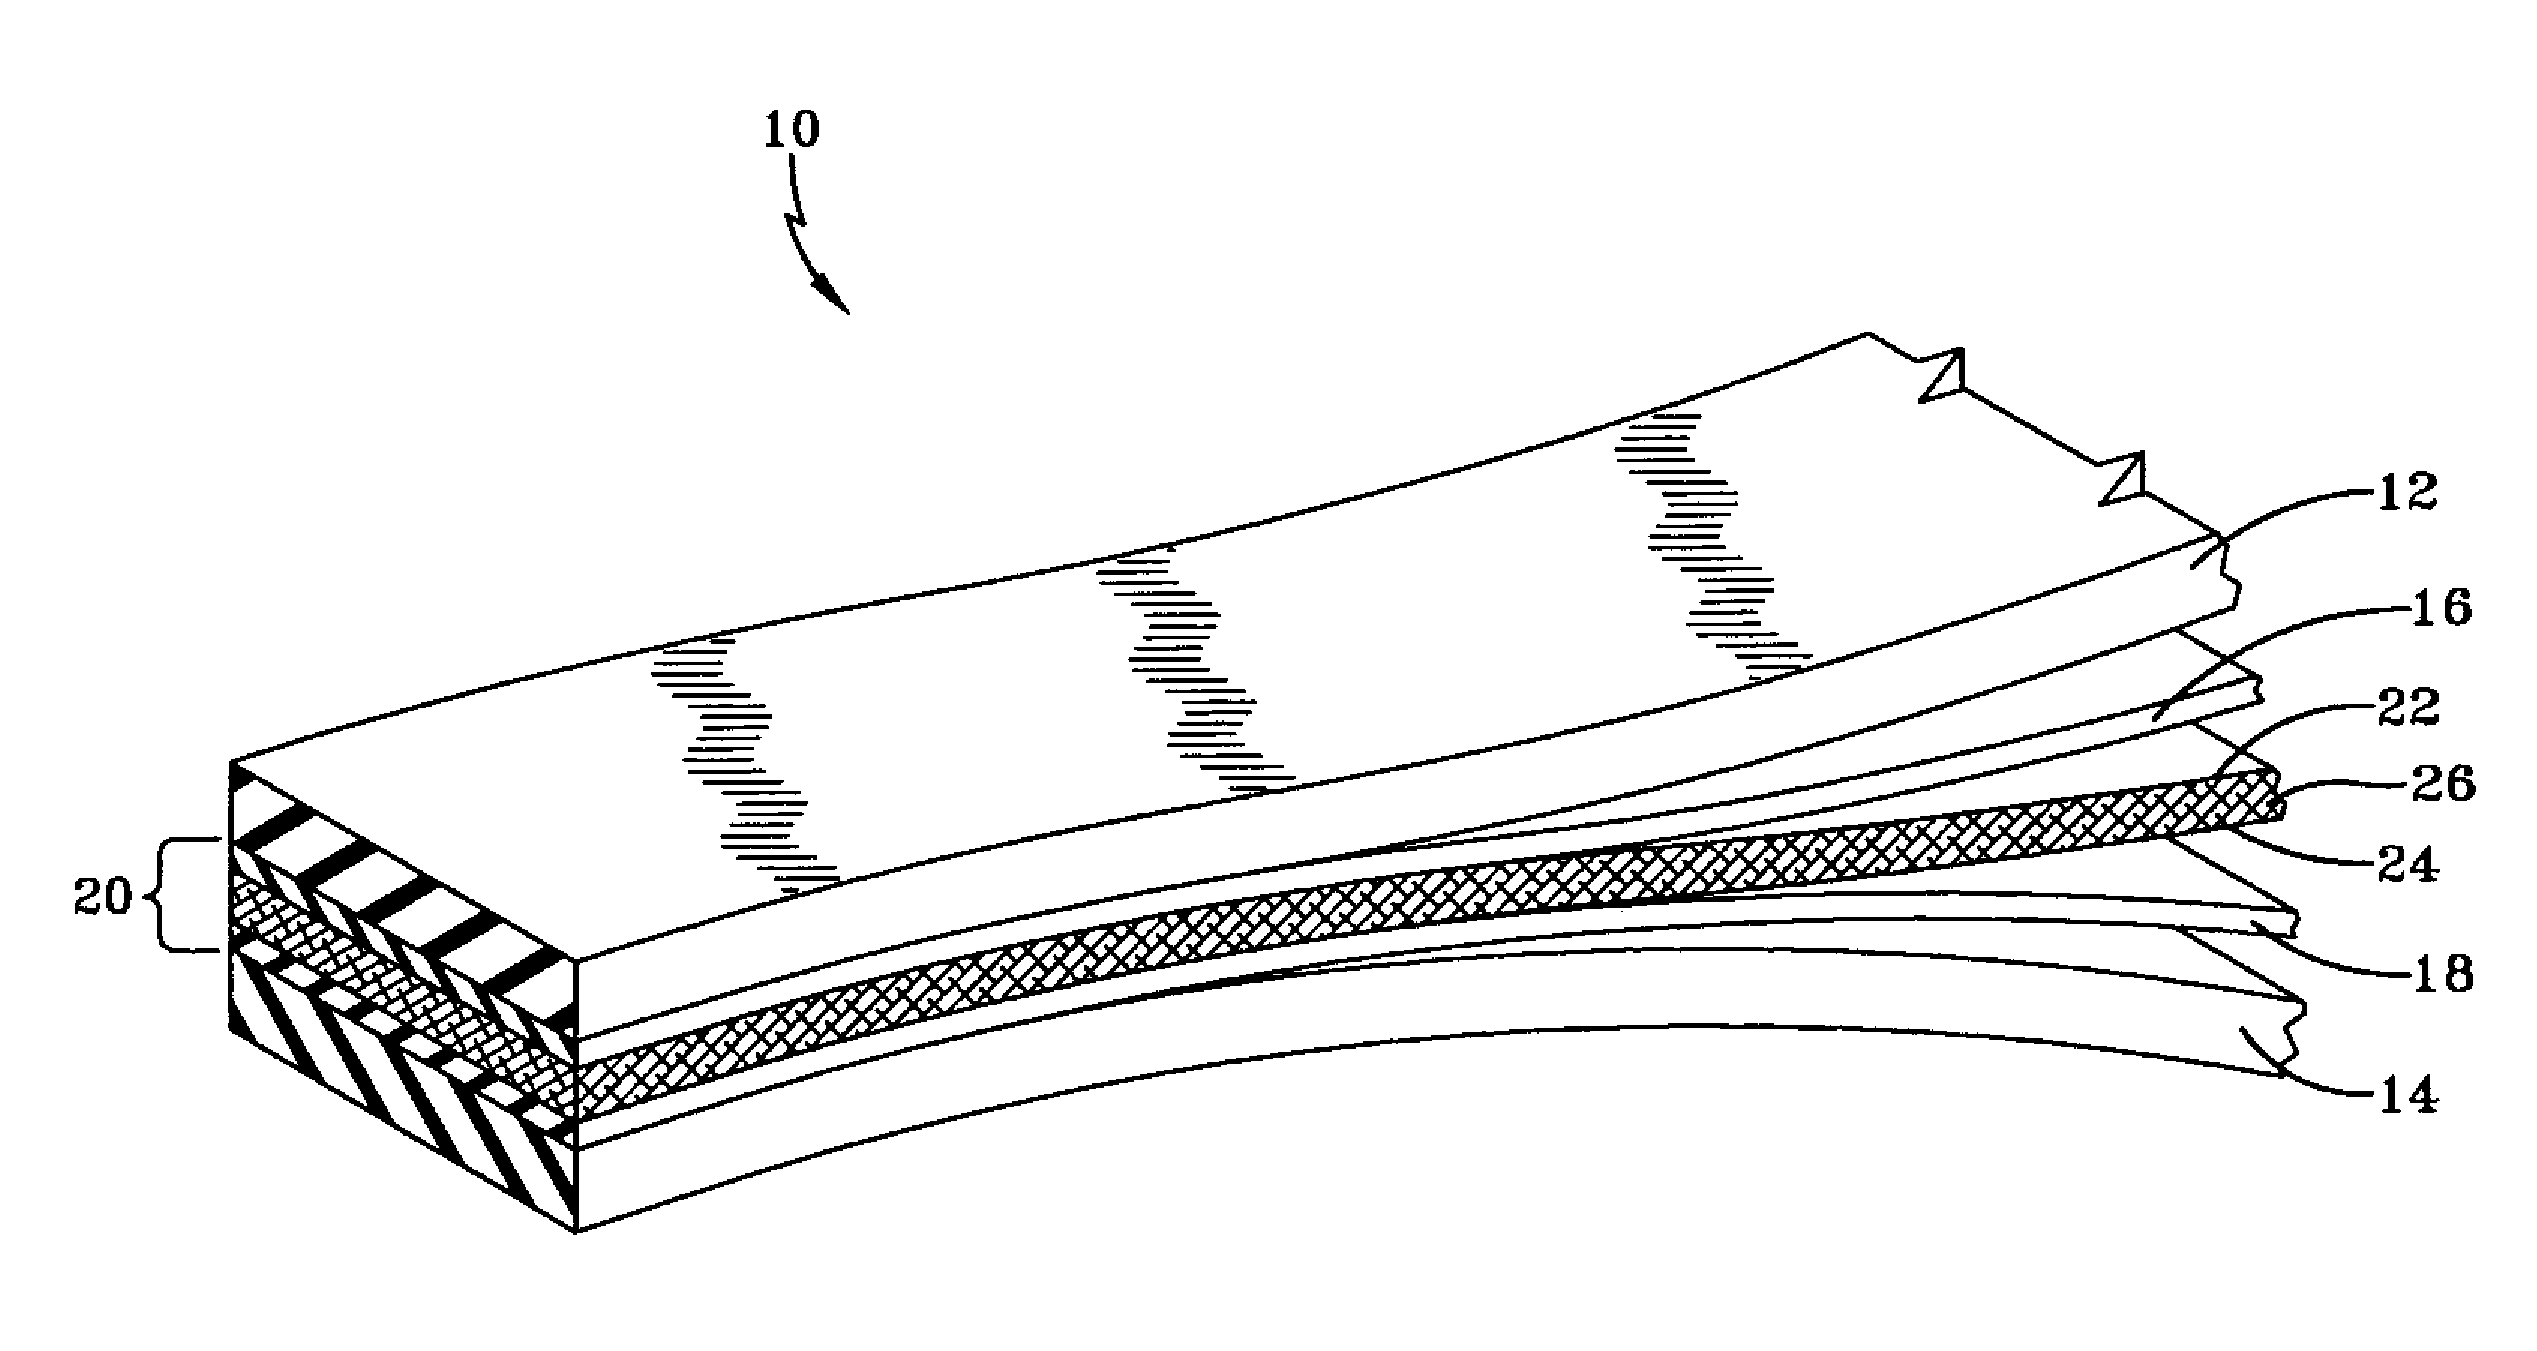 Non-halogenated rubber compounds for use in conveyor belts